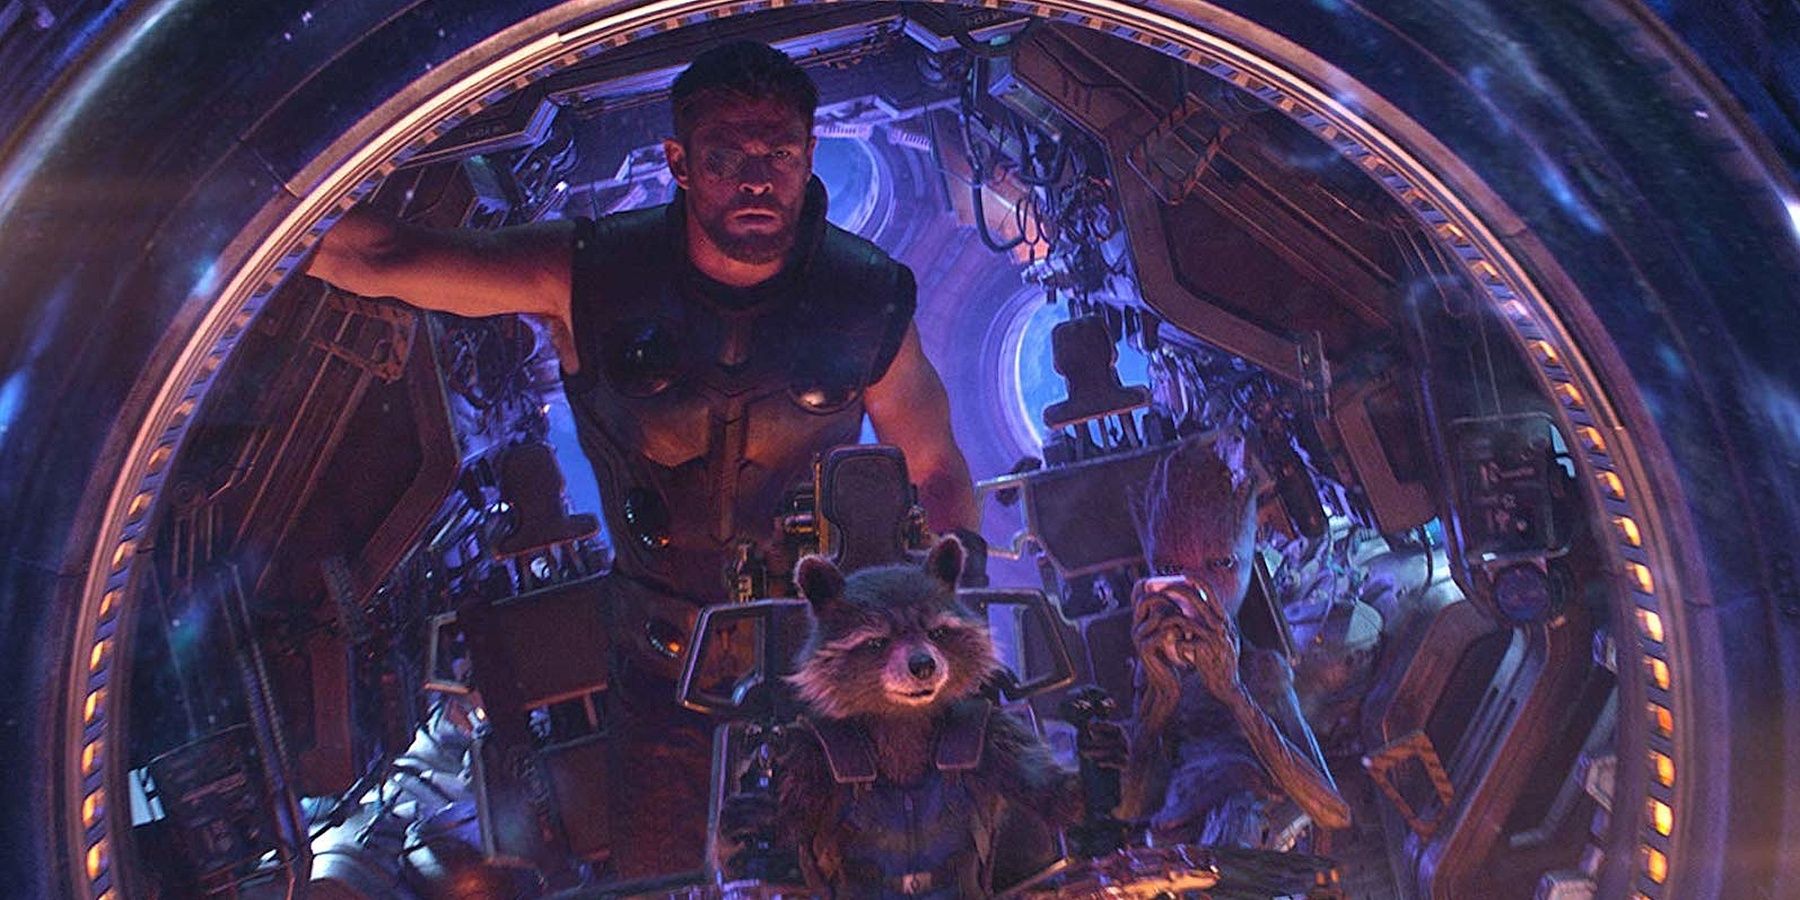 Thor, Rocket, and Teen Groot in a spaceship in Avengers: Infinity War